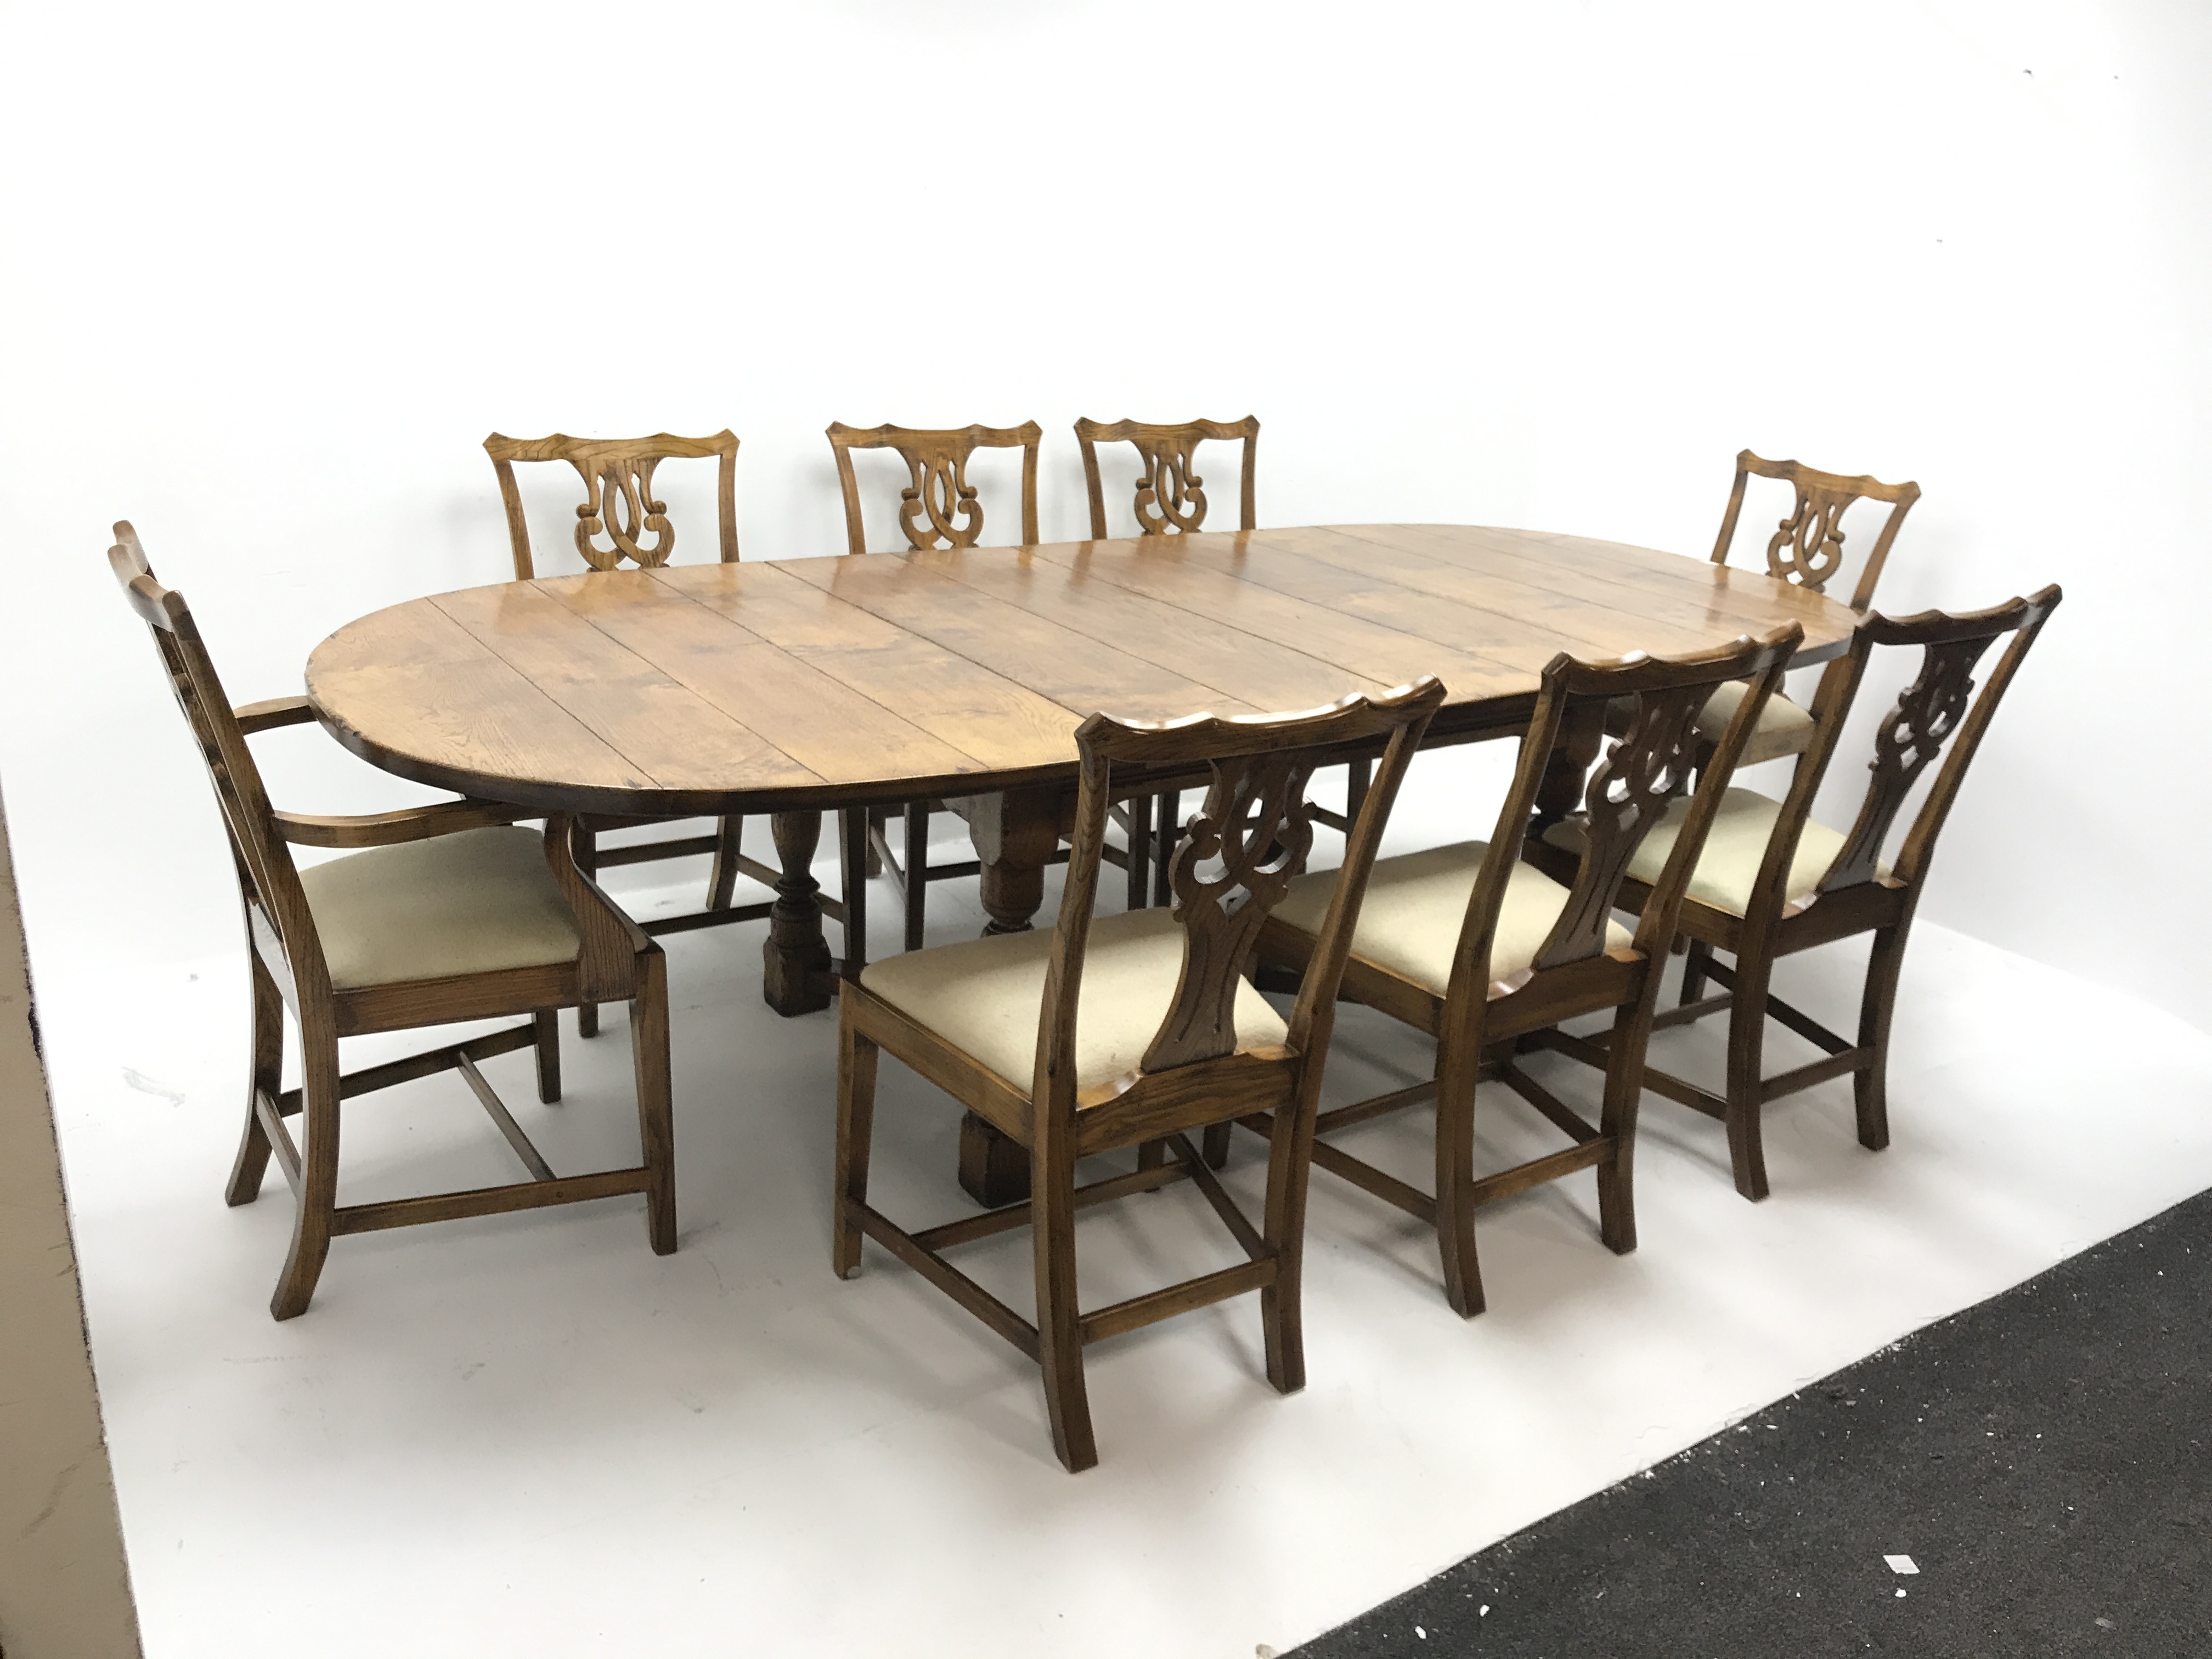 19th century style extending oak dining table, two leaves, baluster supports joined by shaped stretc